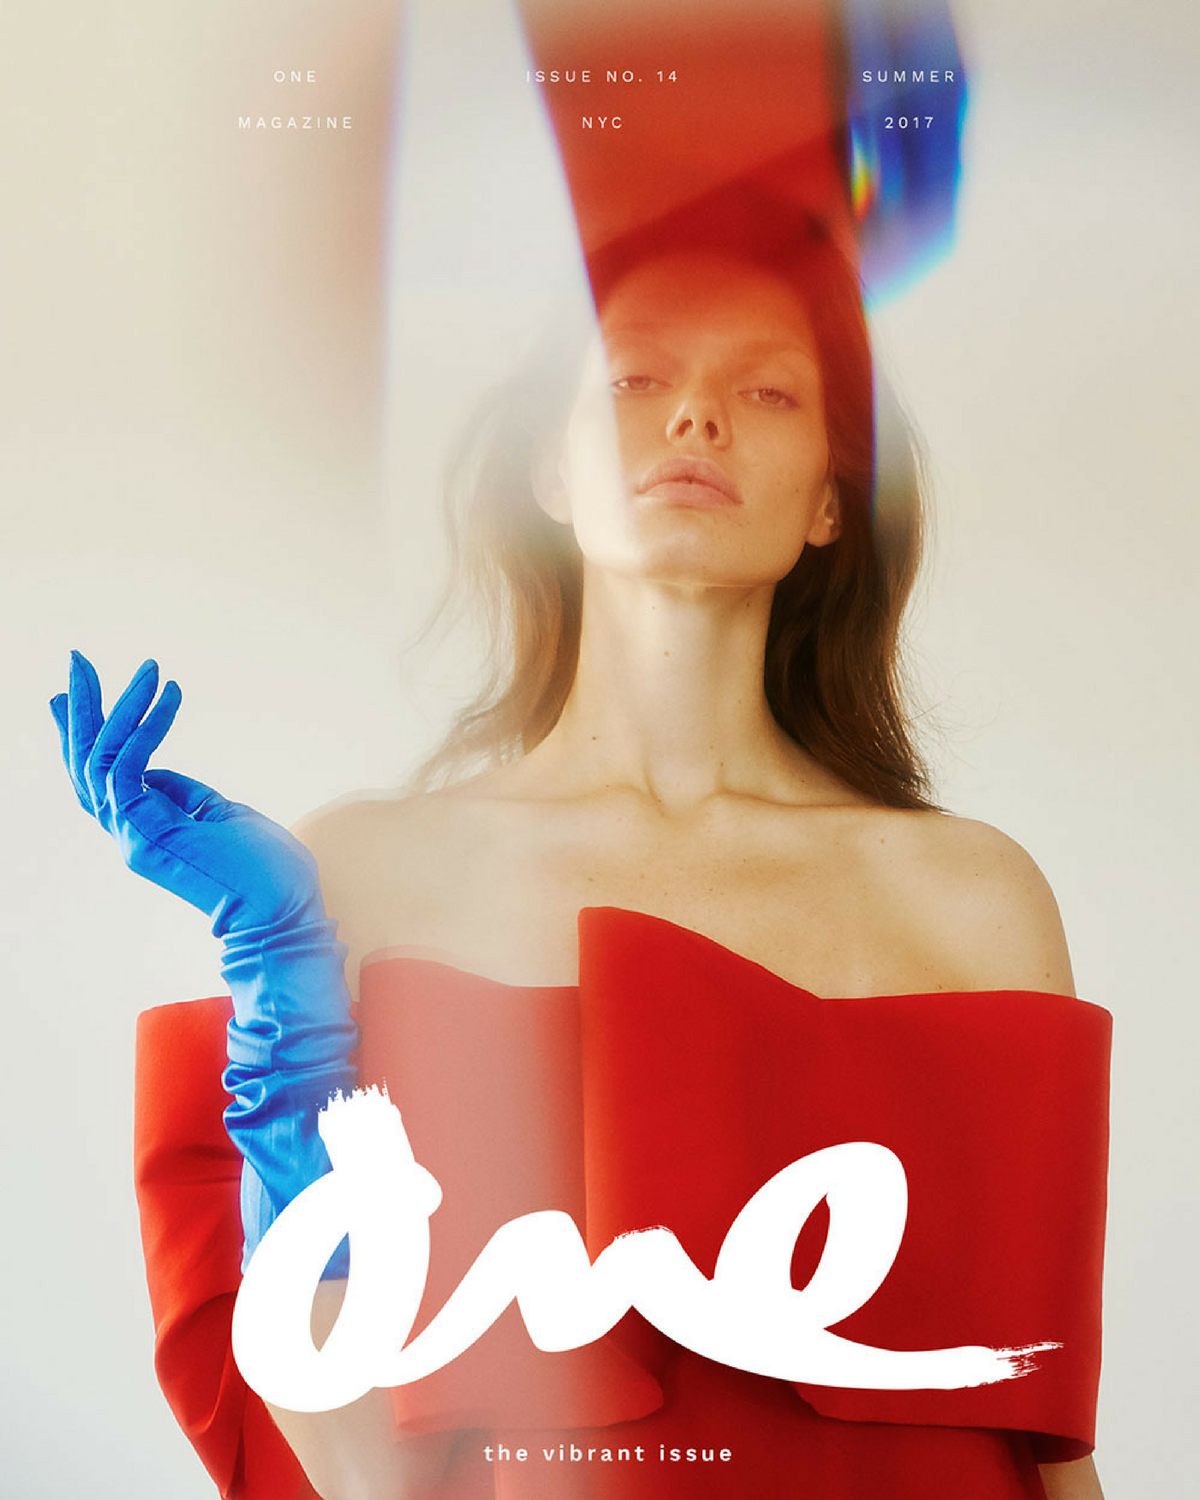 One Magazine Issue 14 - We Love Colors